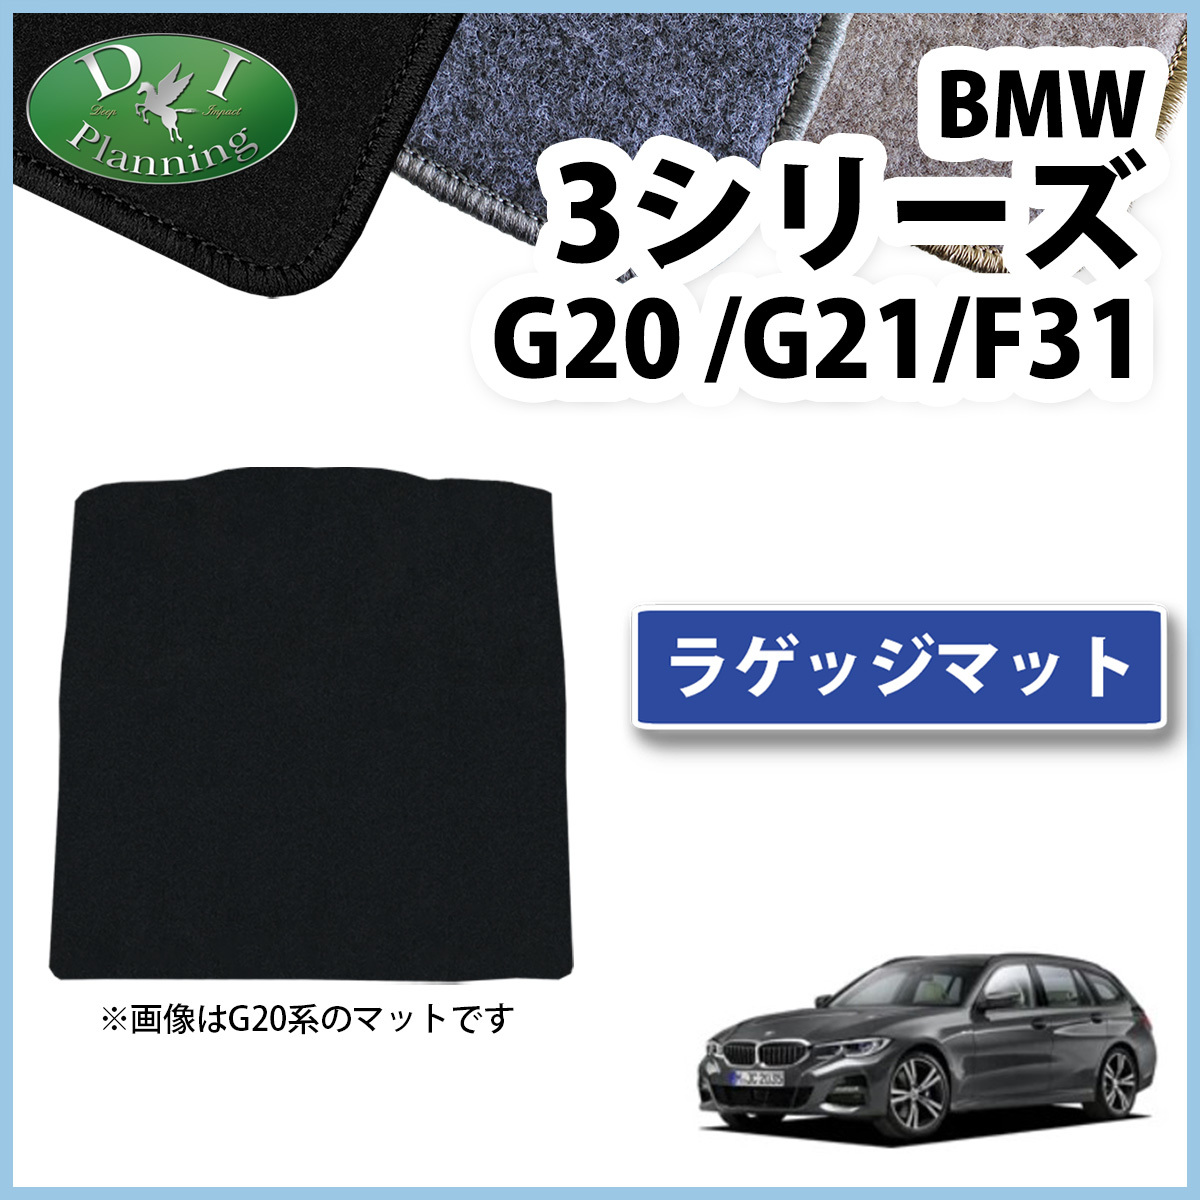 BMW 3 series G20 G21 F31 luggage mat DX luggage cover trunk seat luggage room mat floor mat after market new goods 